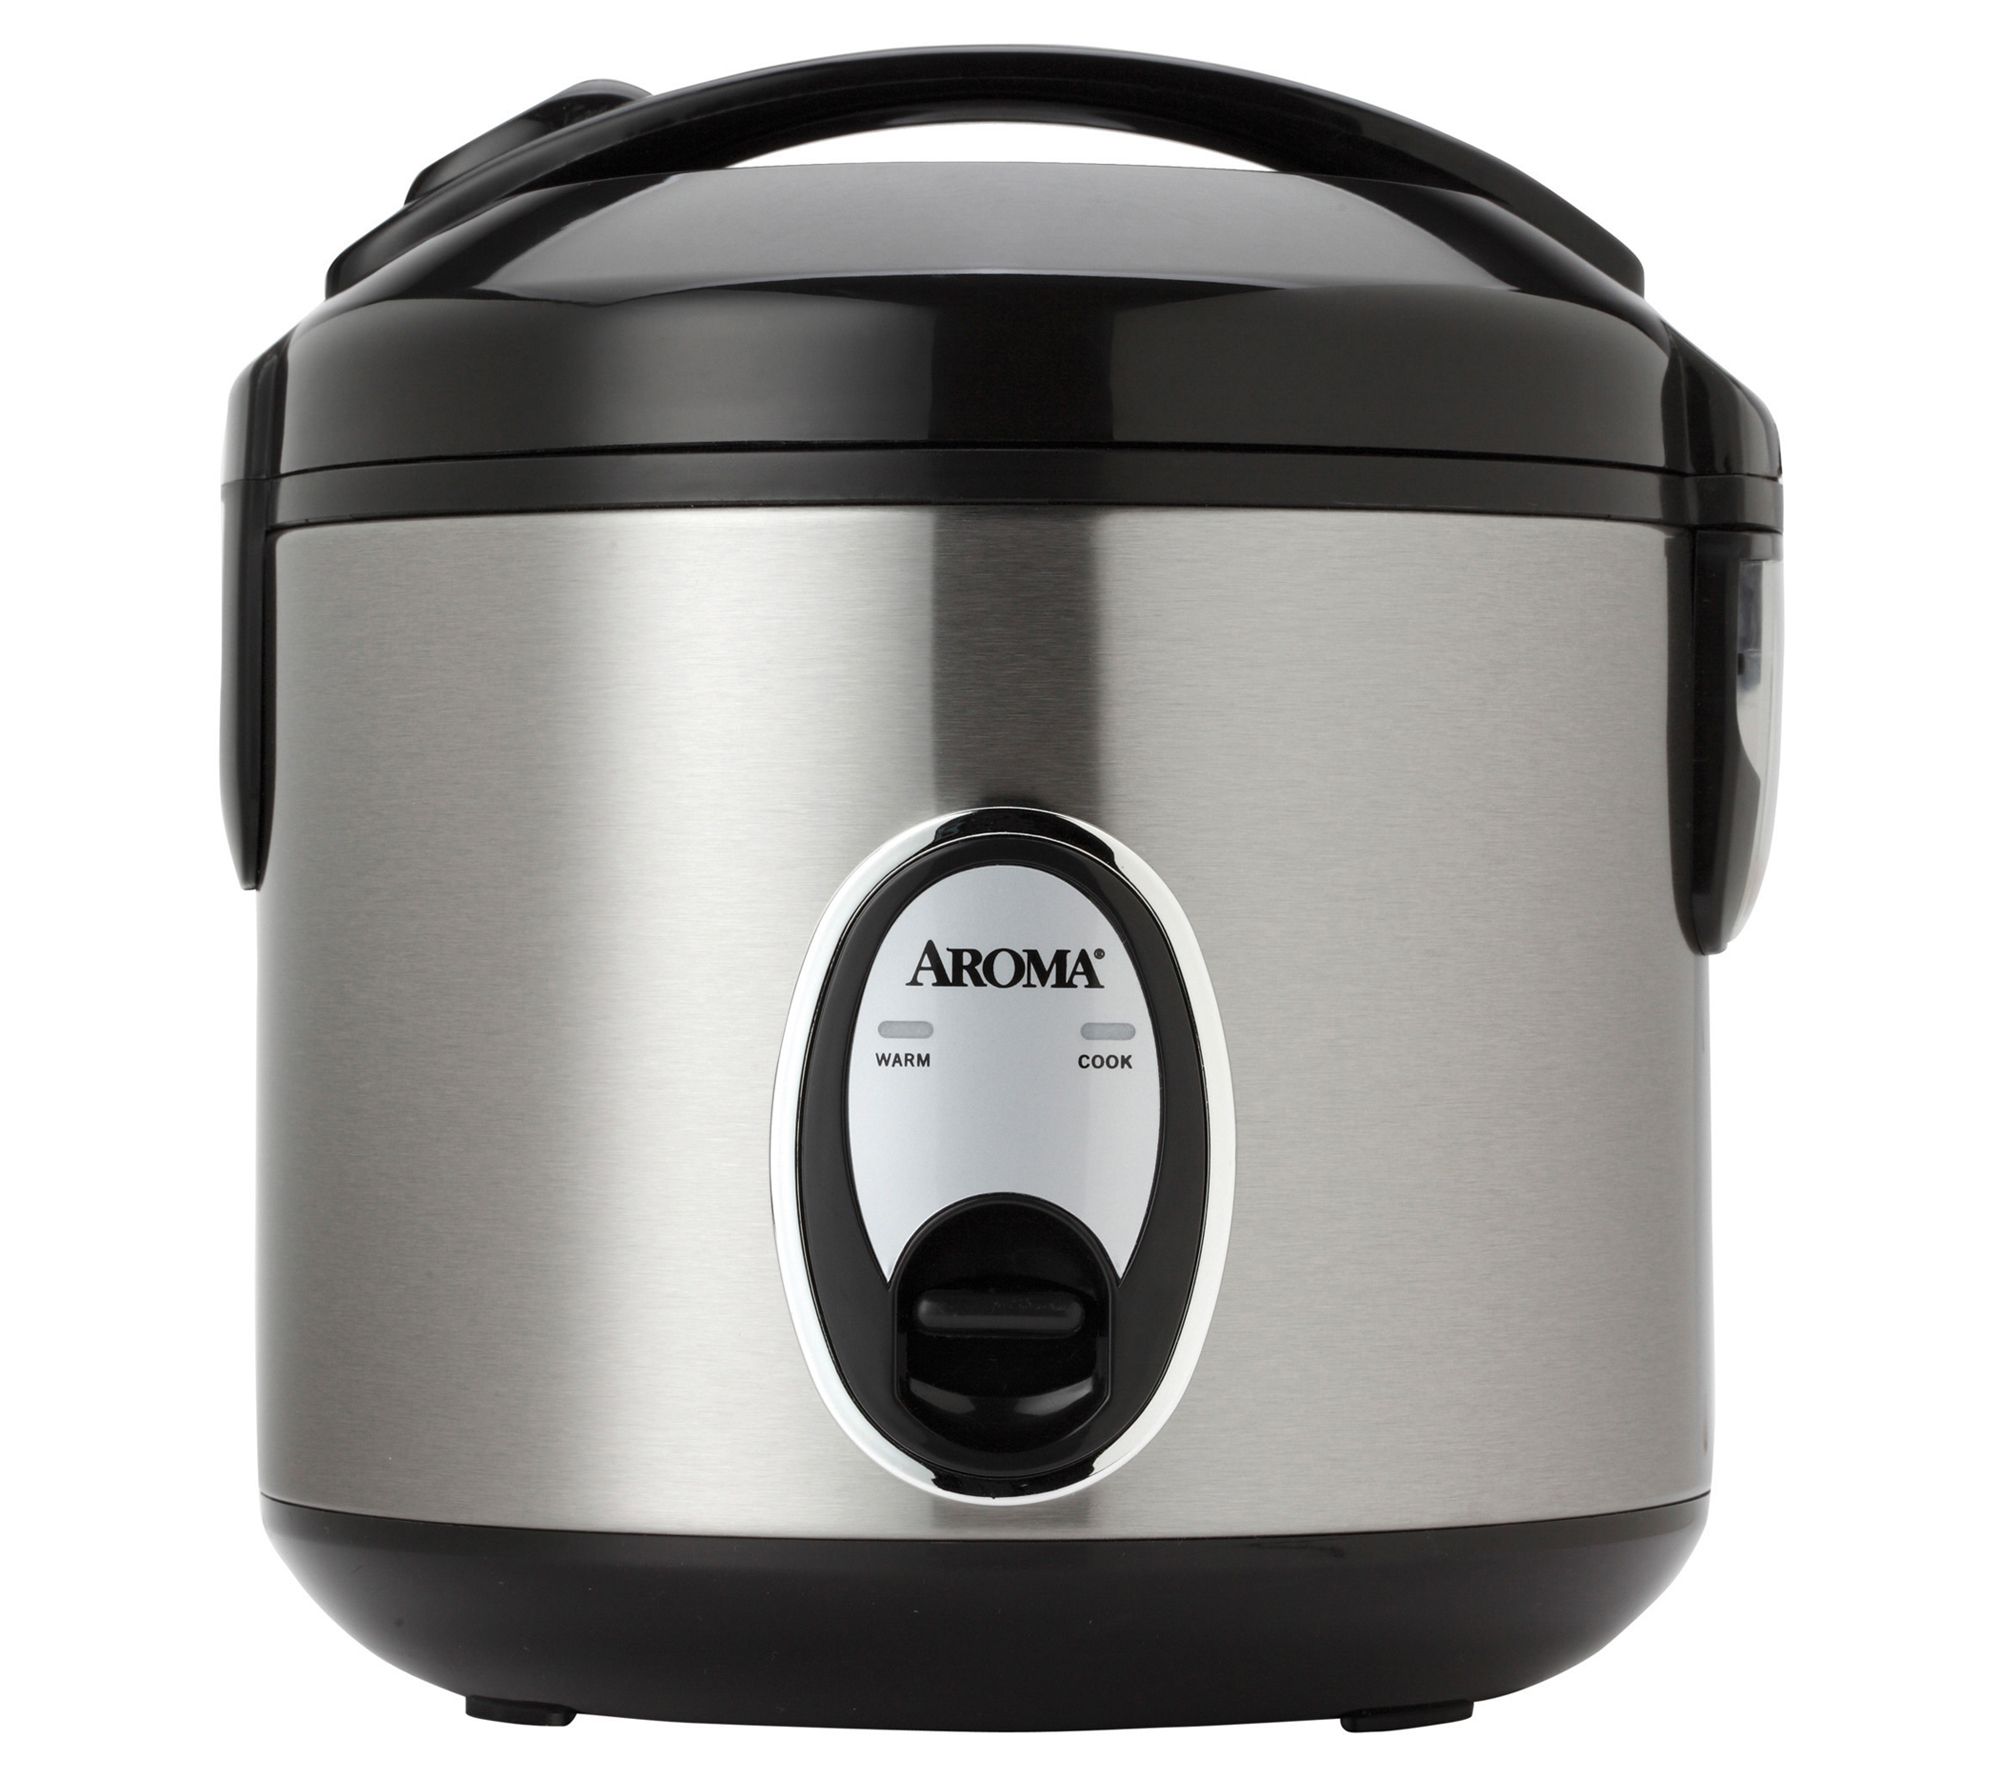 Tiger 8-Cup Stainless Steel Rice Cooker/Warmer 